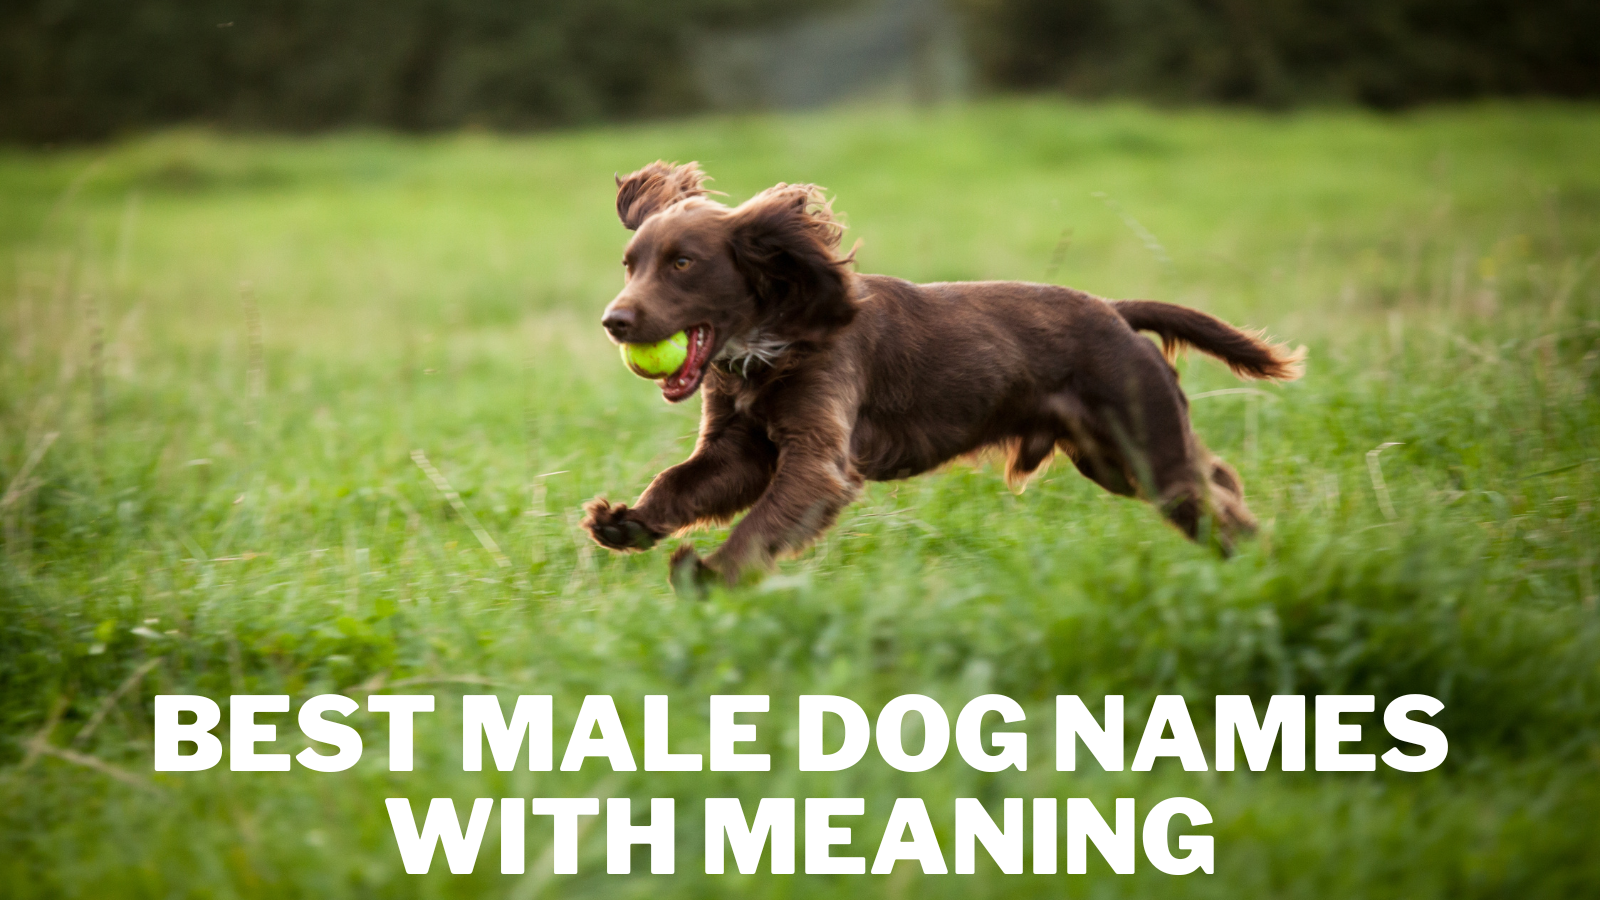 Best Male Dog Names With Meaning